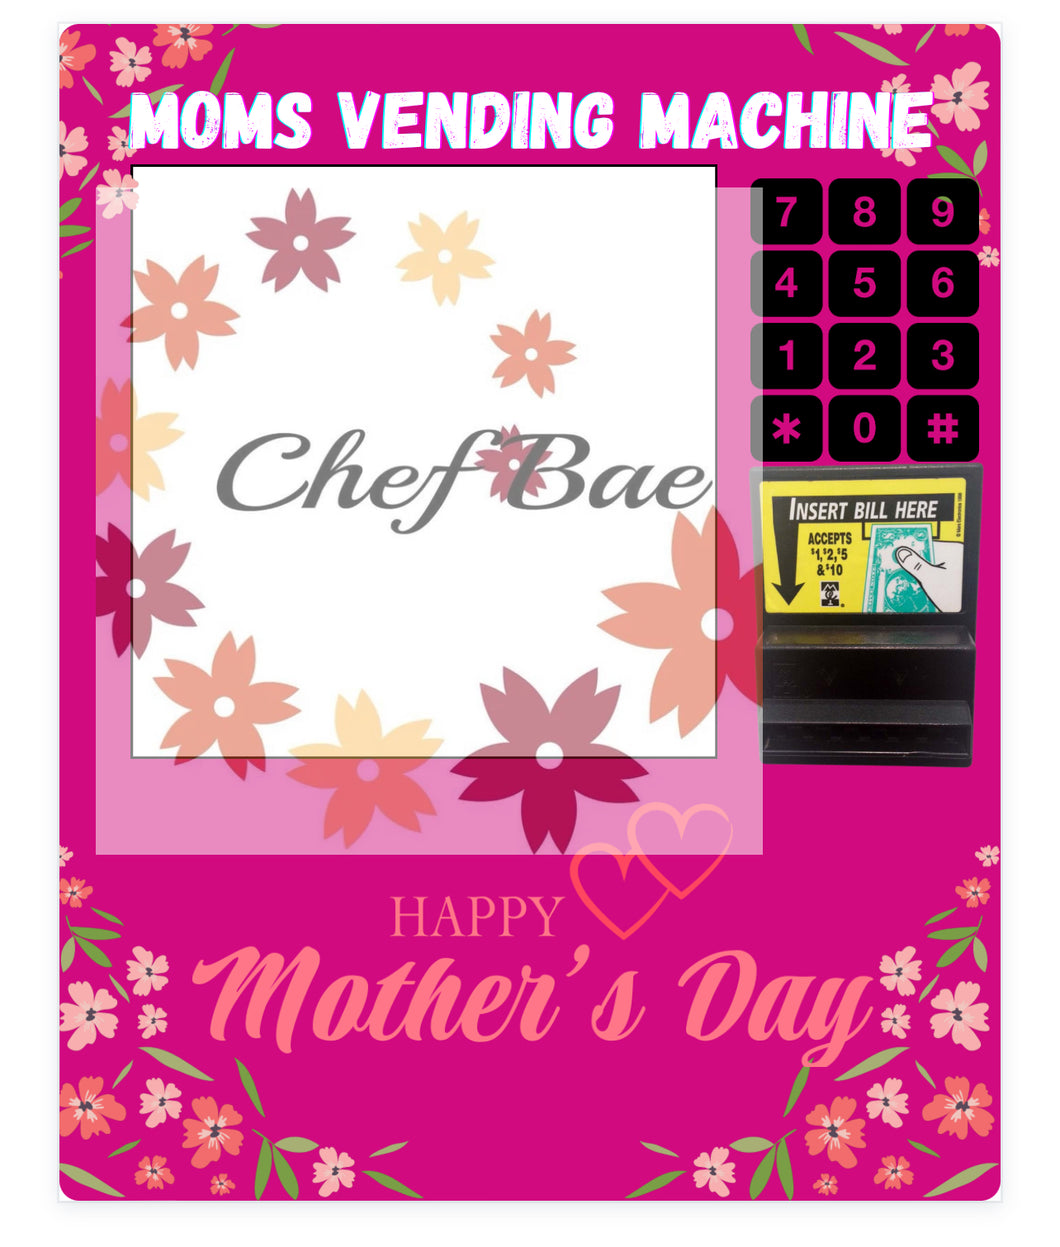 Mother's Day Canva Templates for Vending Machines (10 templates included)